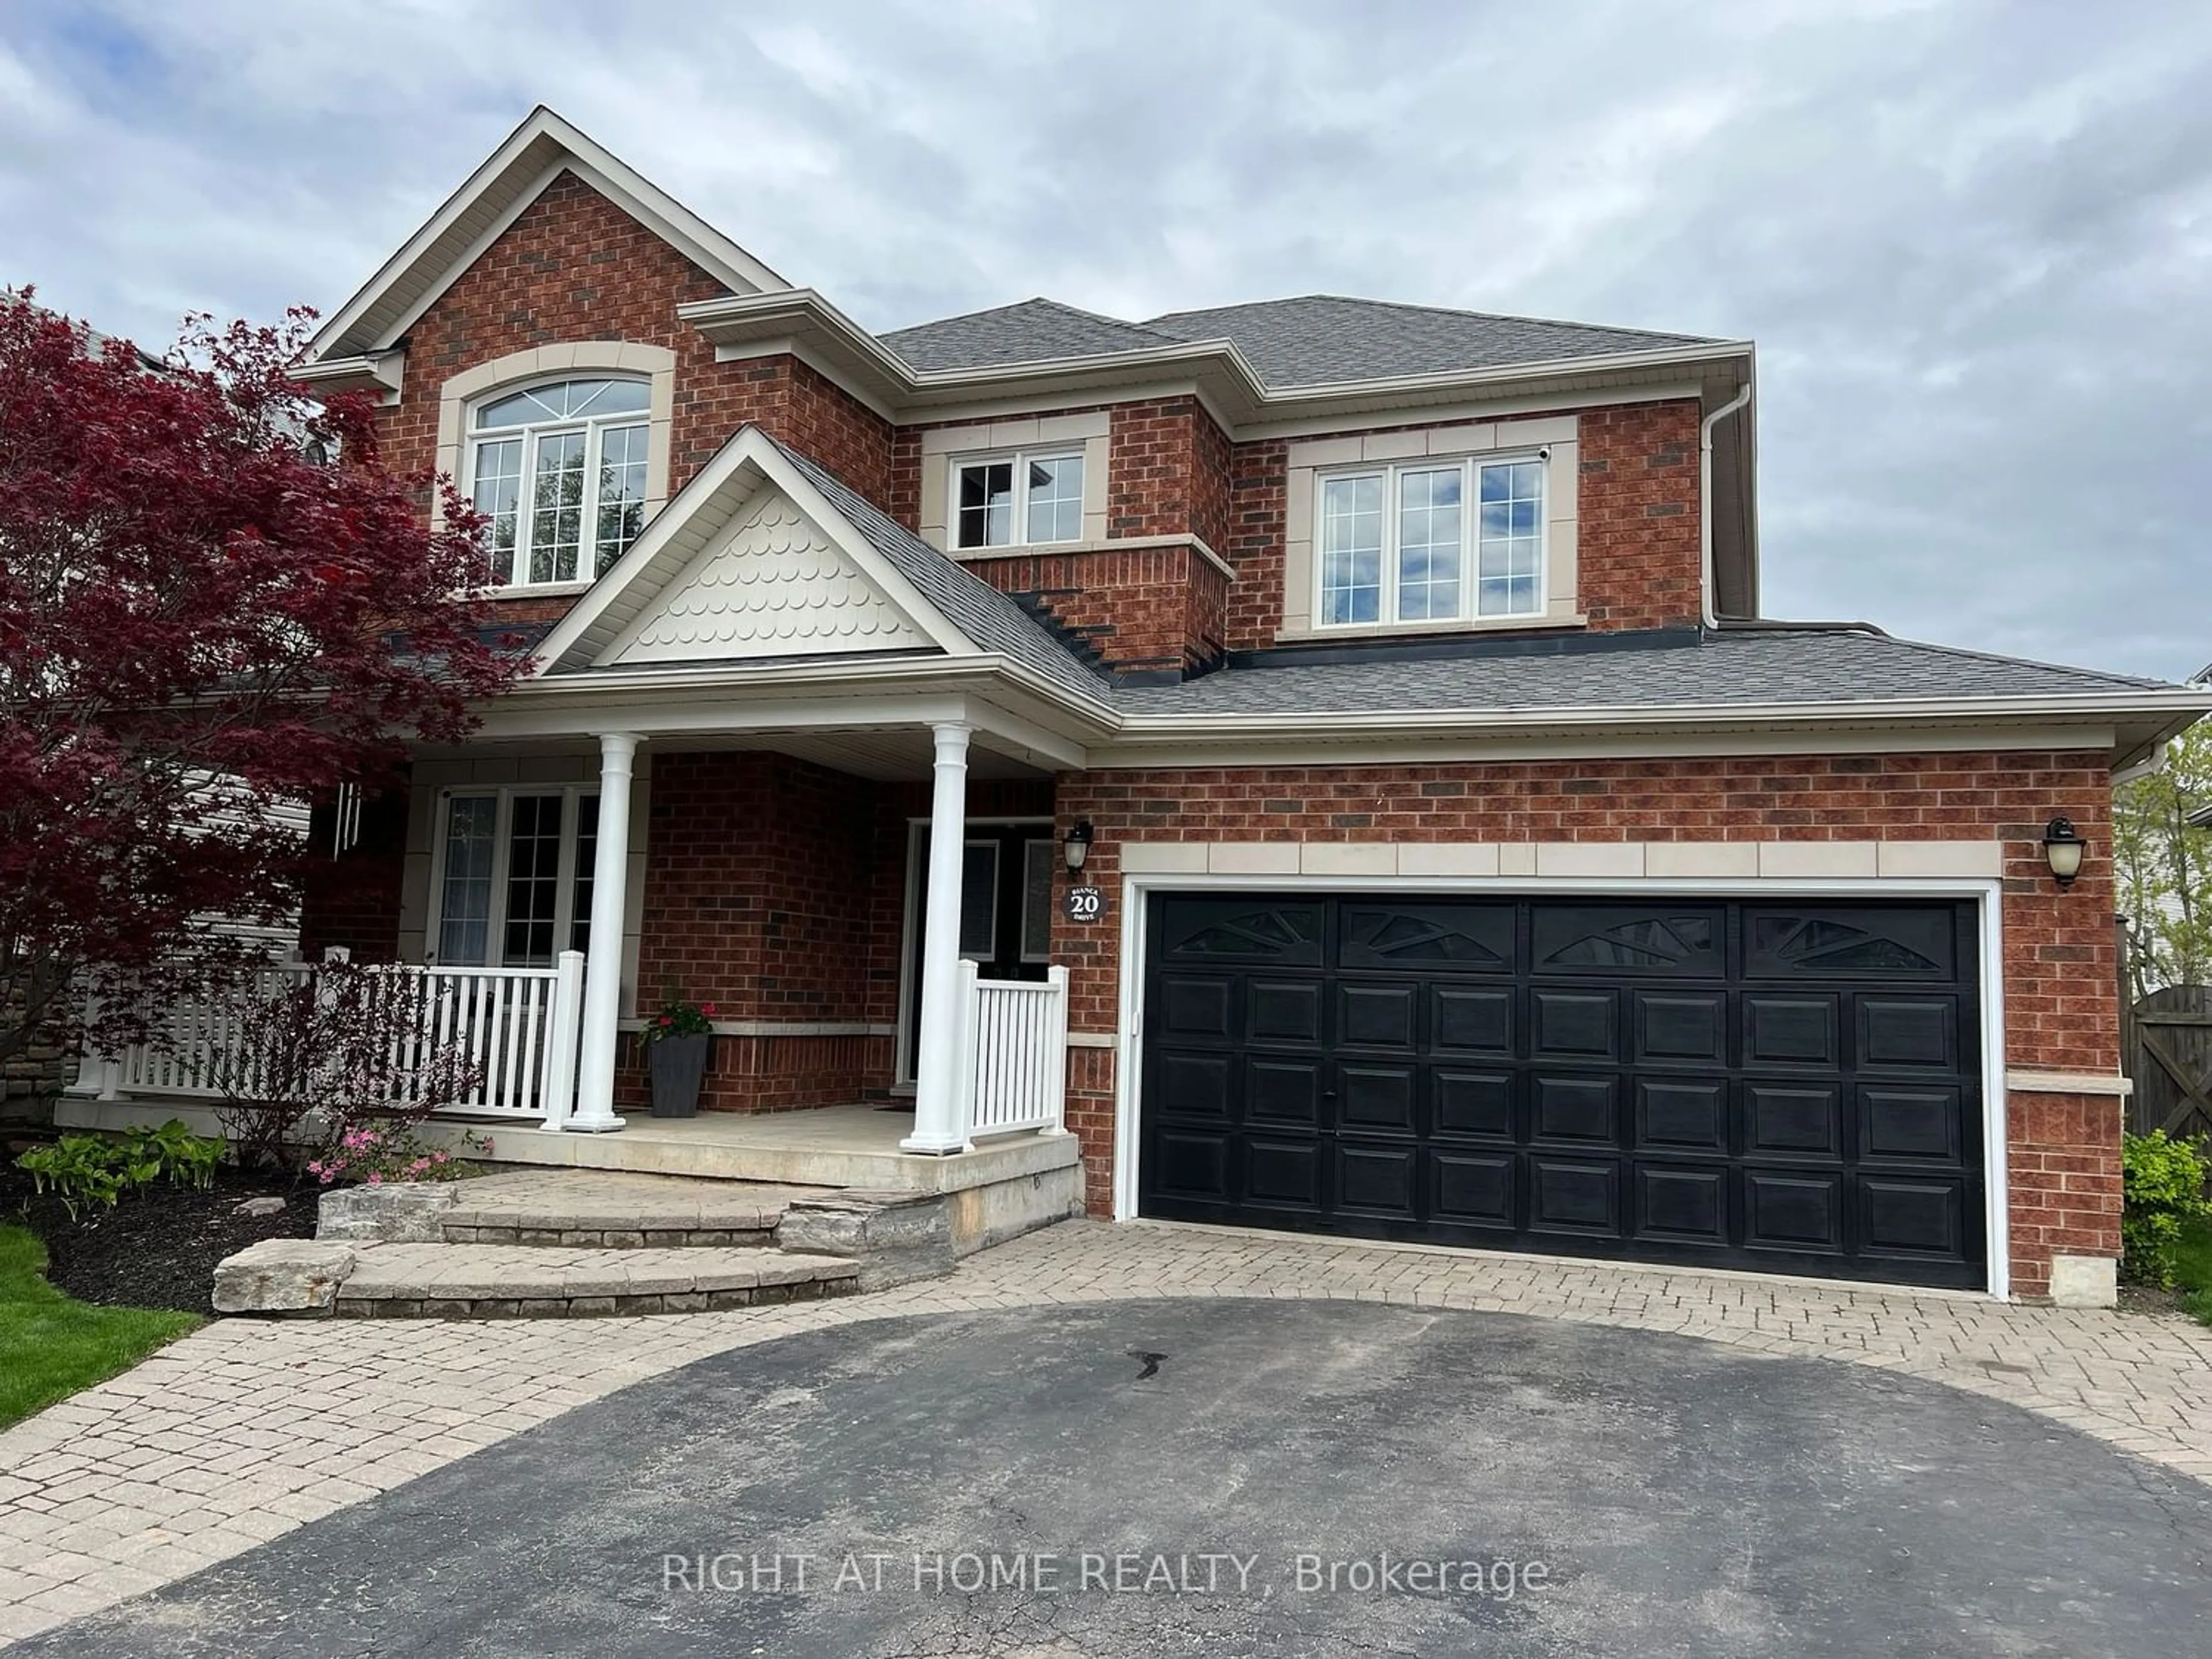 Home with brick exterior material for 20 Bianca Dr, Whitby Ontario L1M 2J3